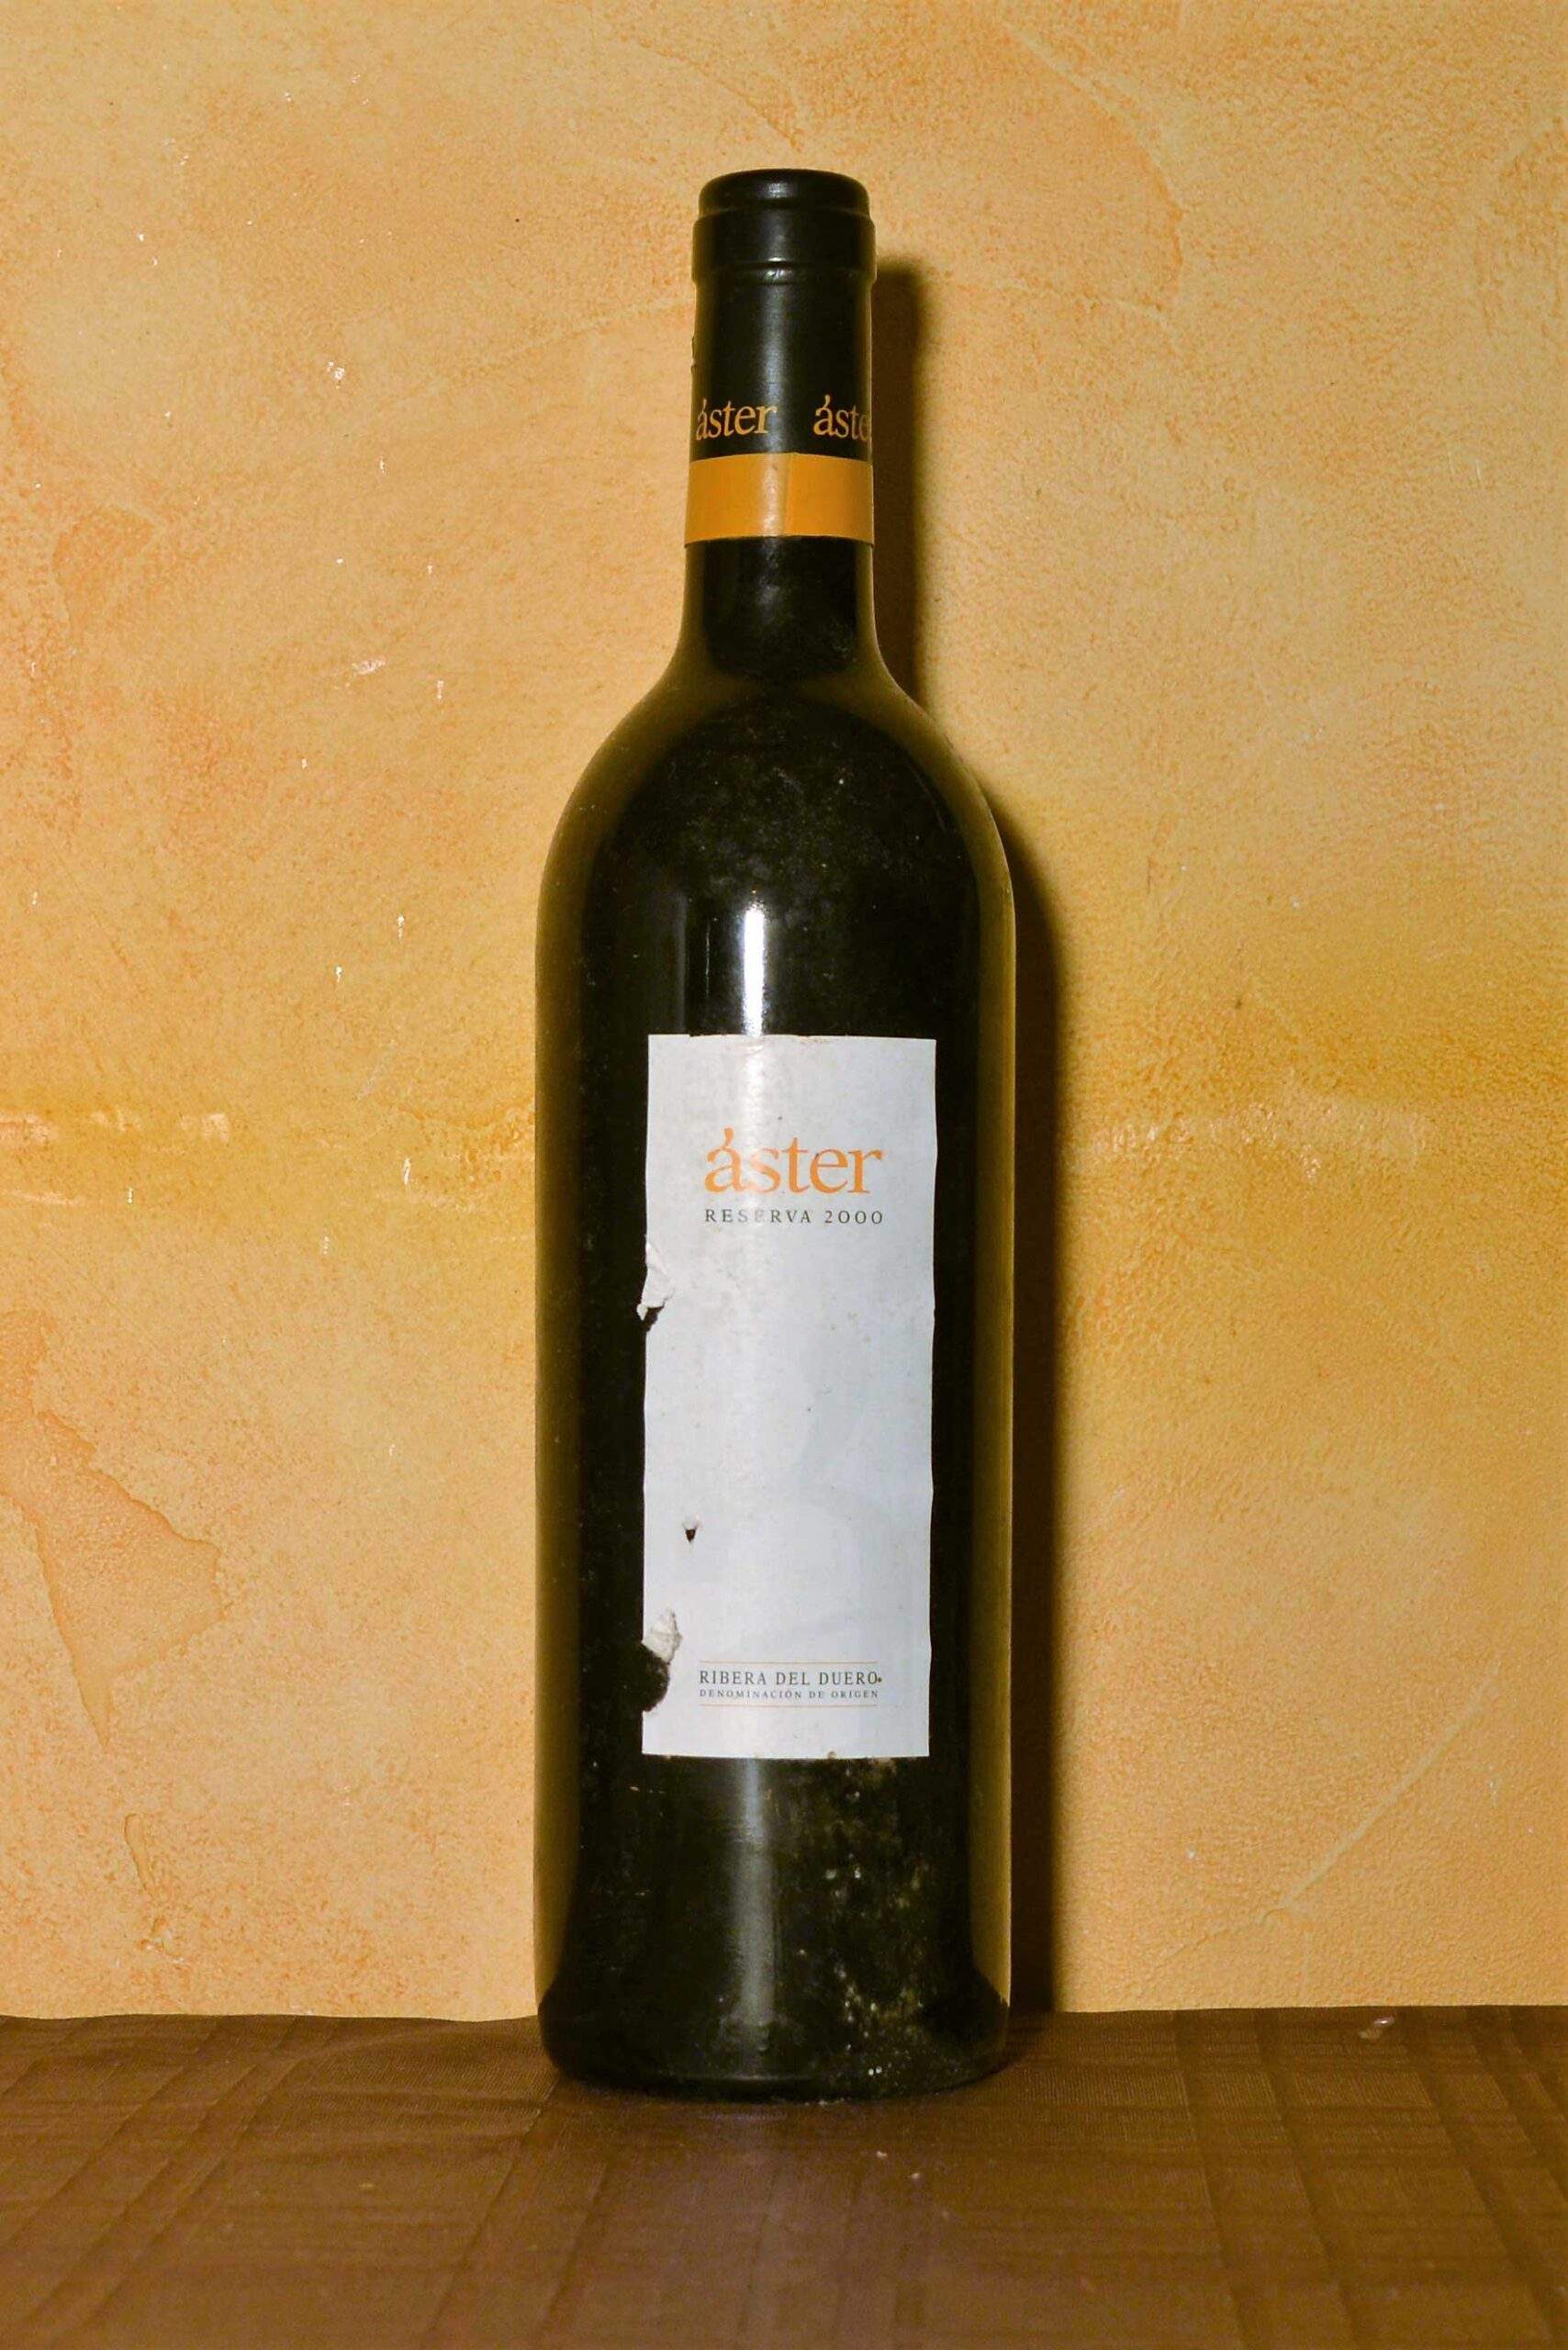 Aster 2000